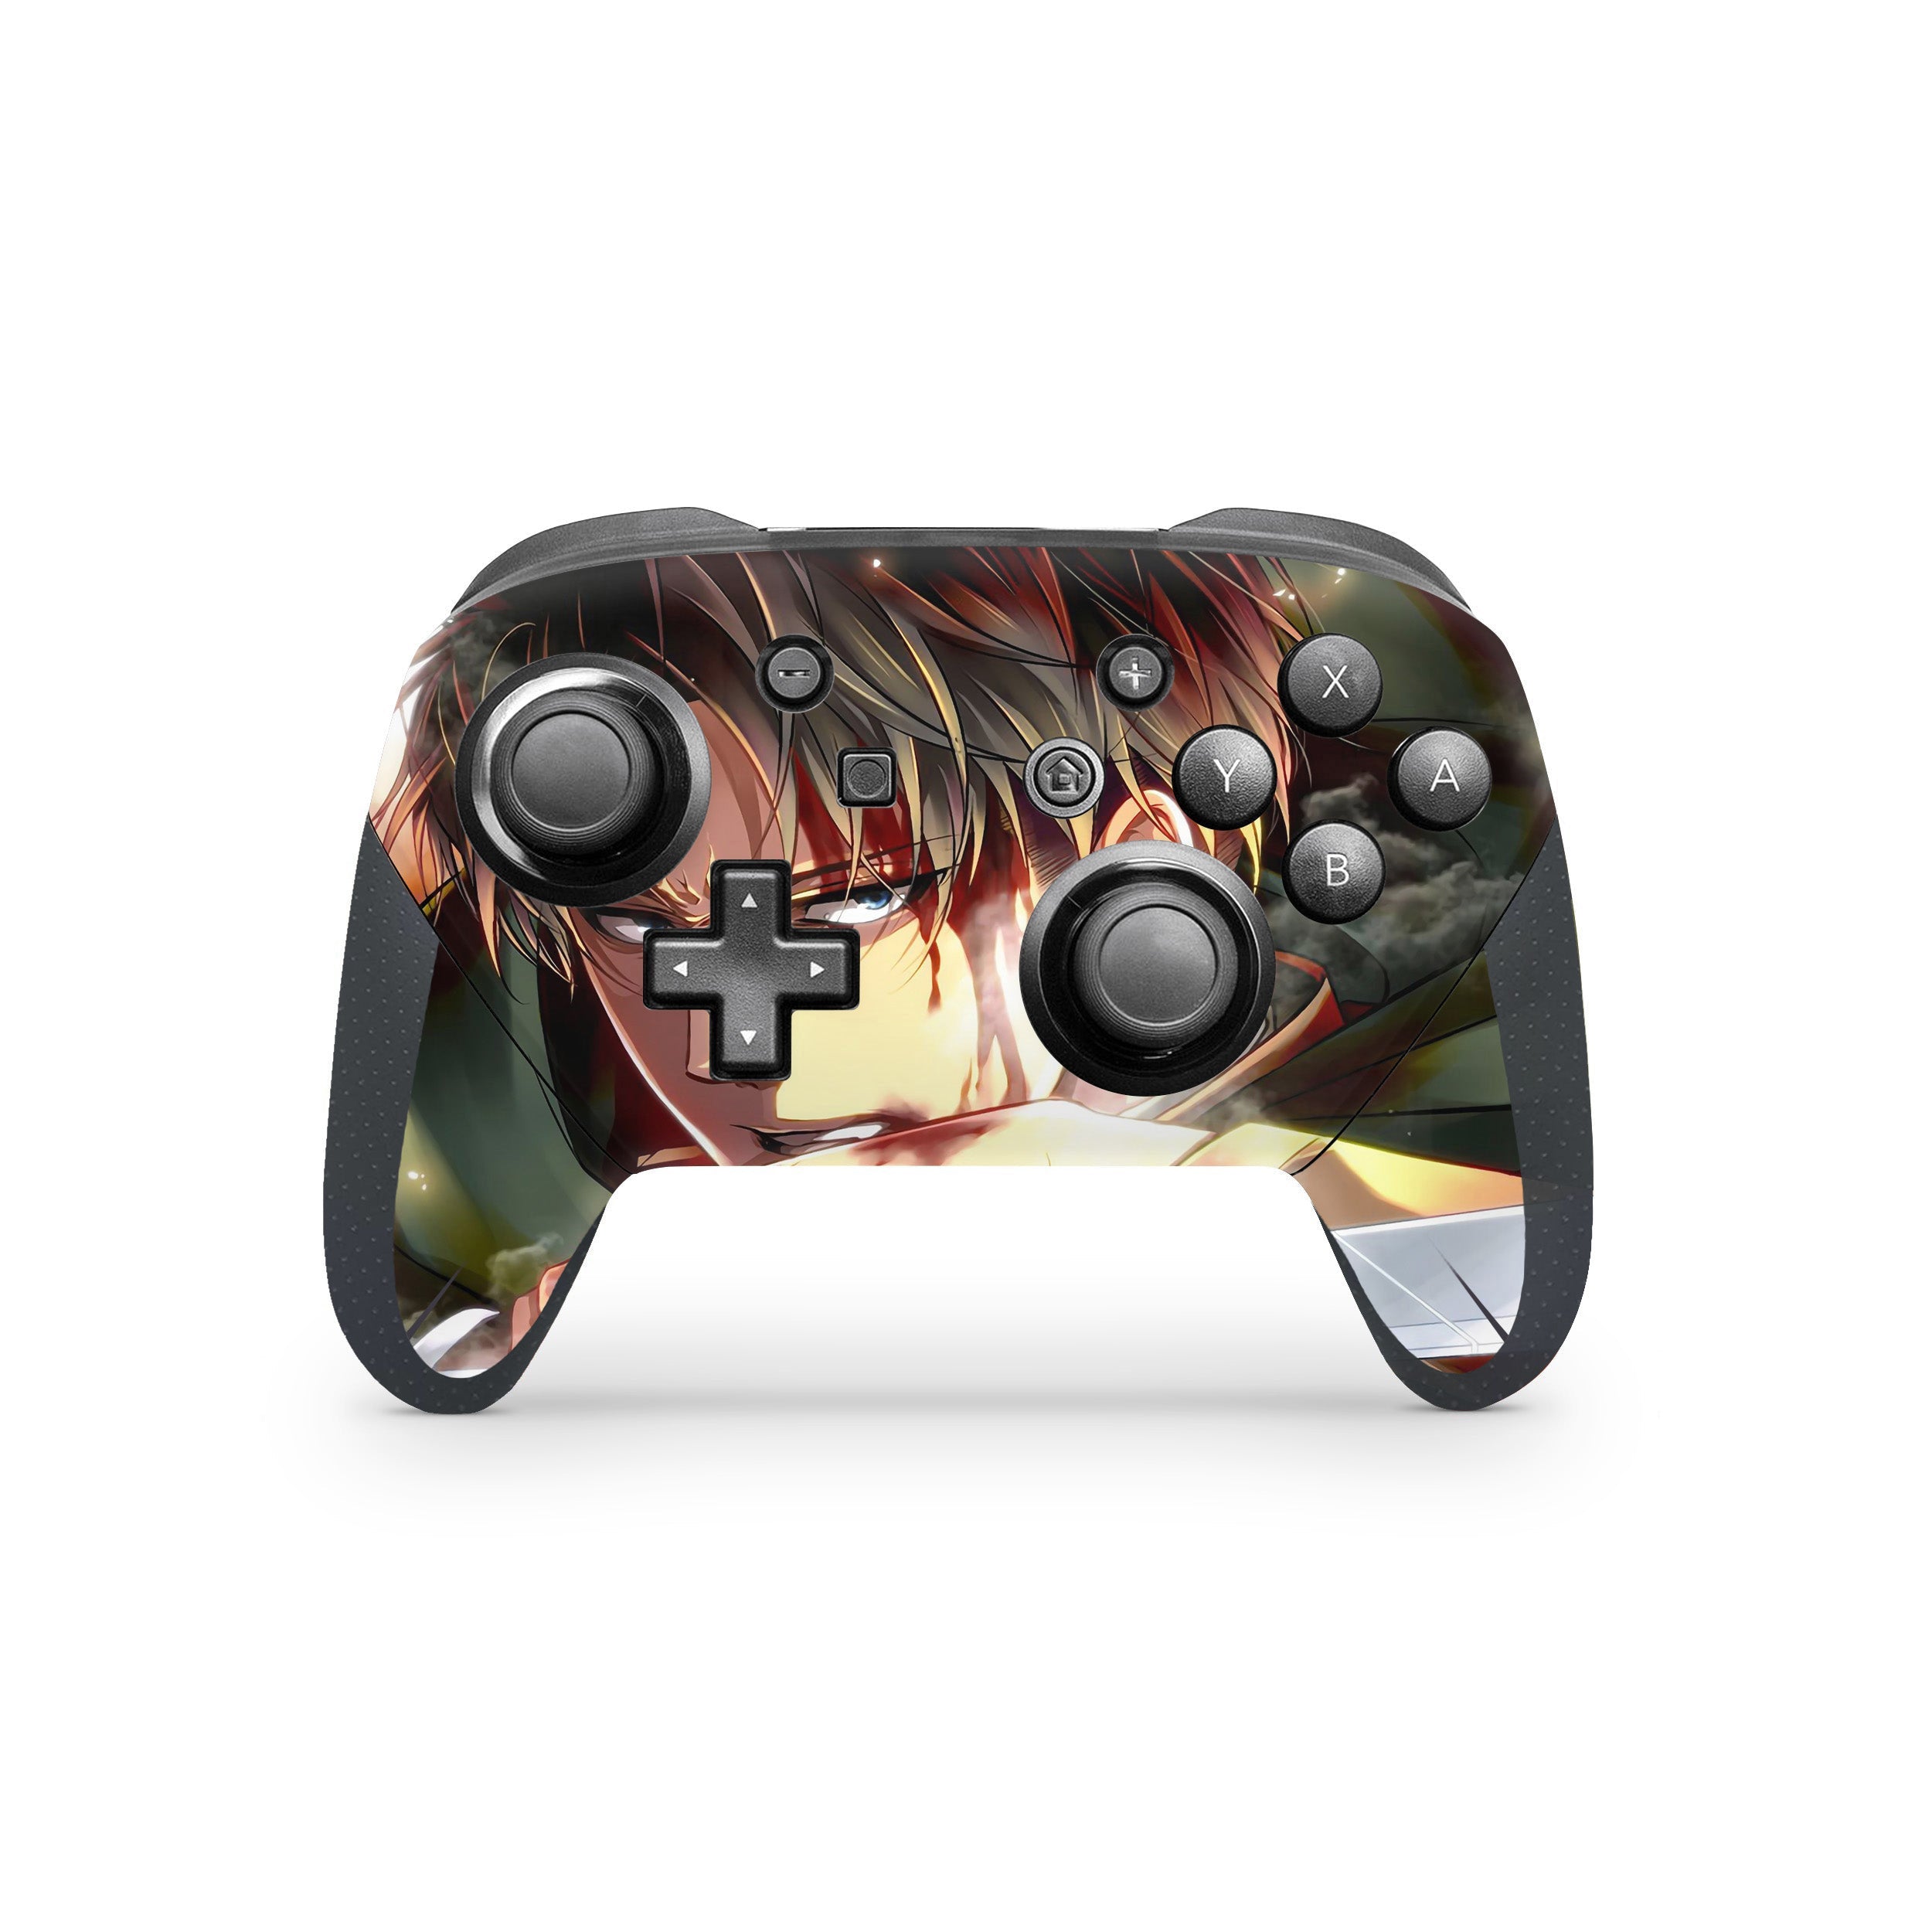 A video game skin featuring a Attack On Titan Levi Ackerman design for the Switch Pro Controller.